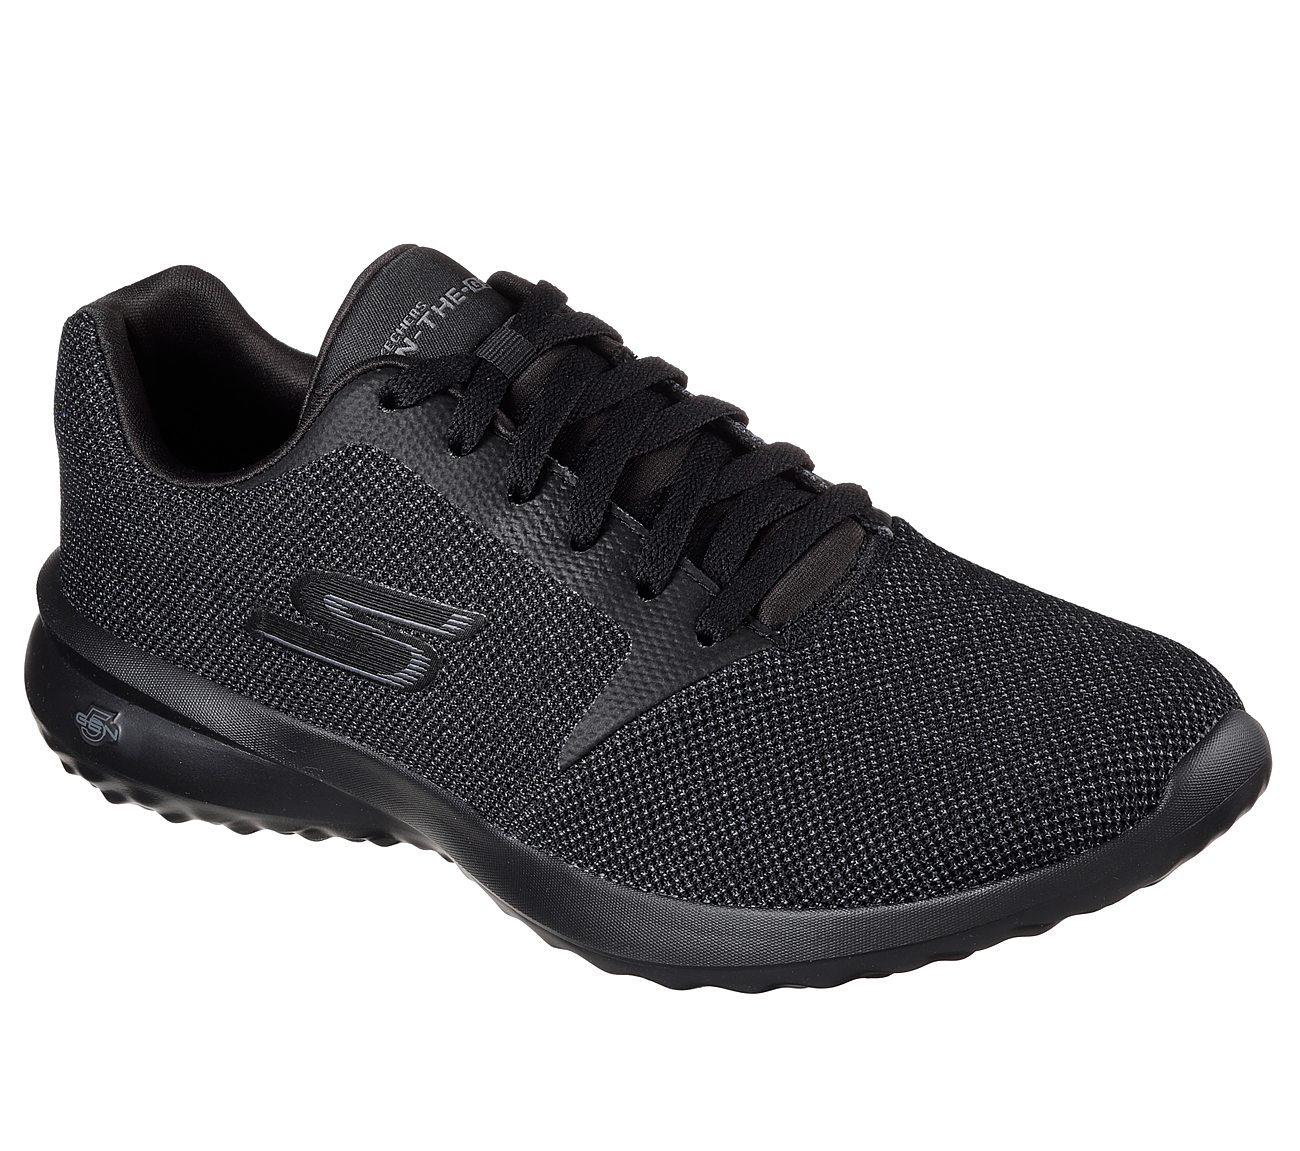 Buy SKECHERS ON-THE-GO CITY 3 Skechers Performance Shoes